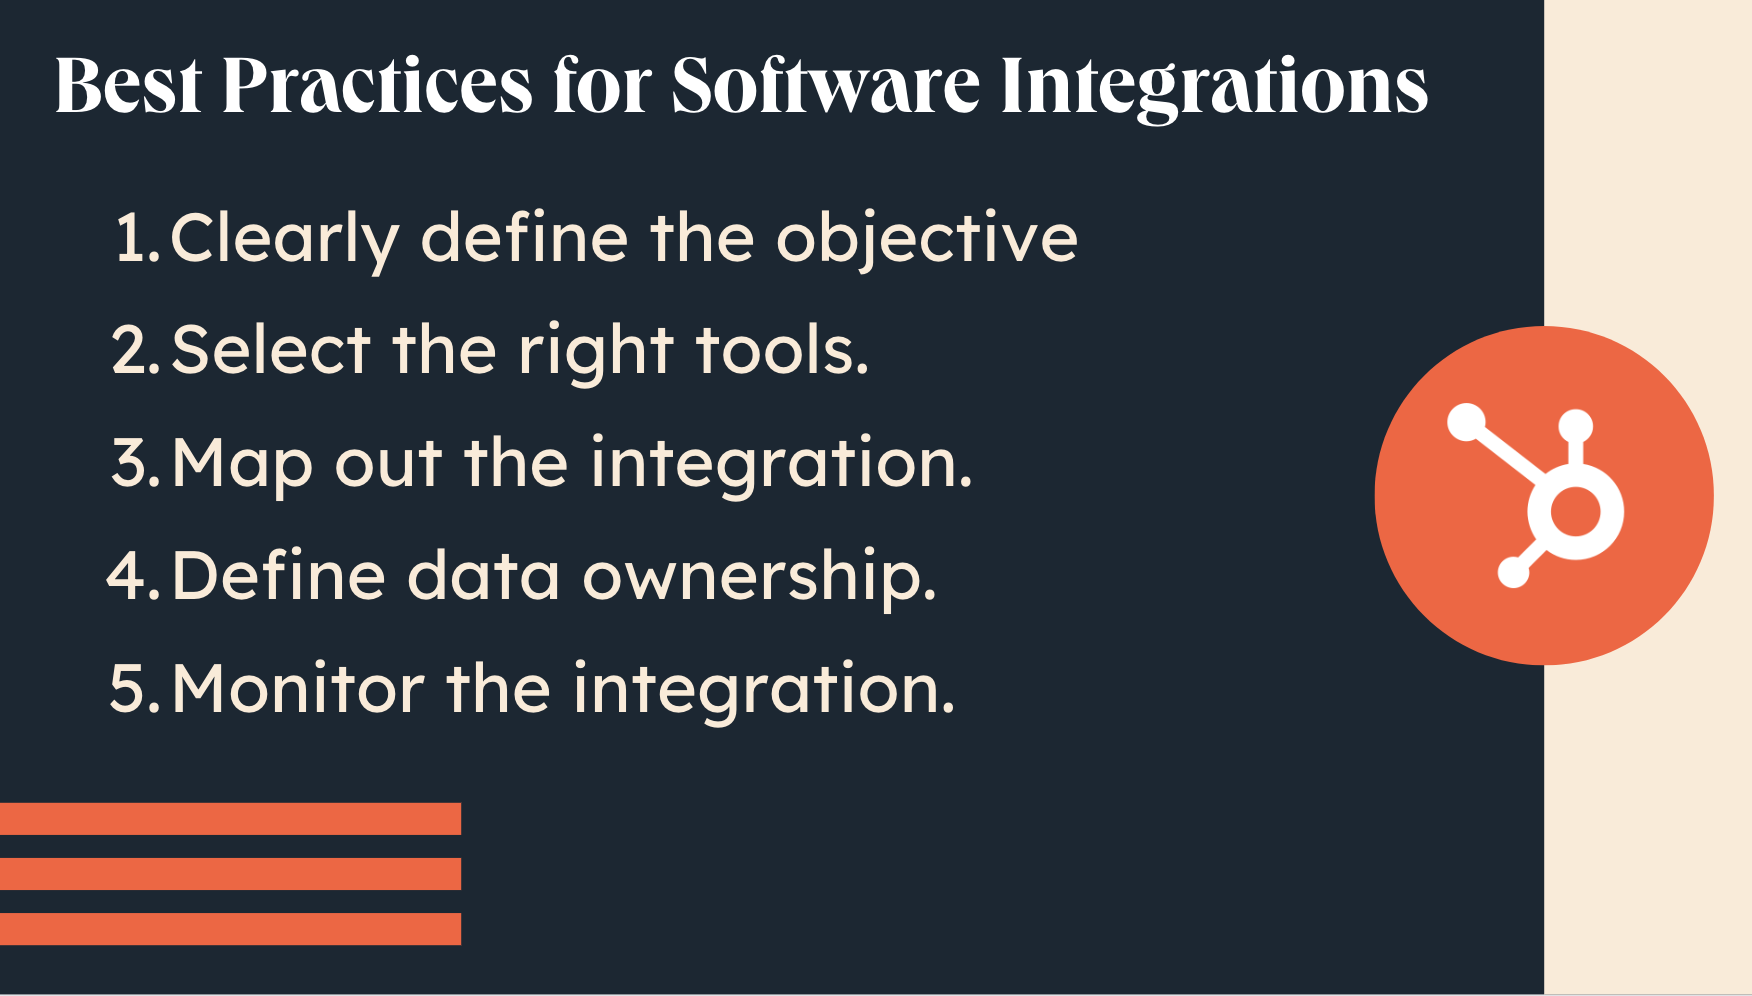 Best practices for software integrations